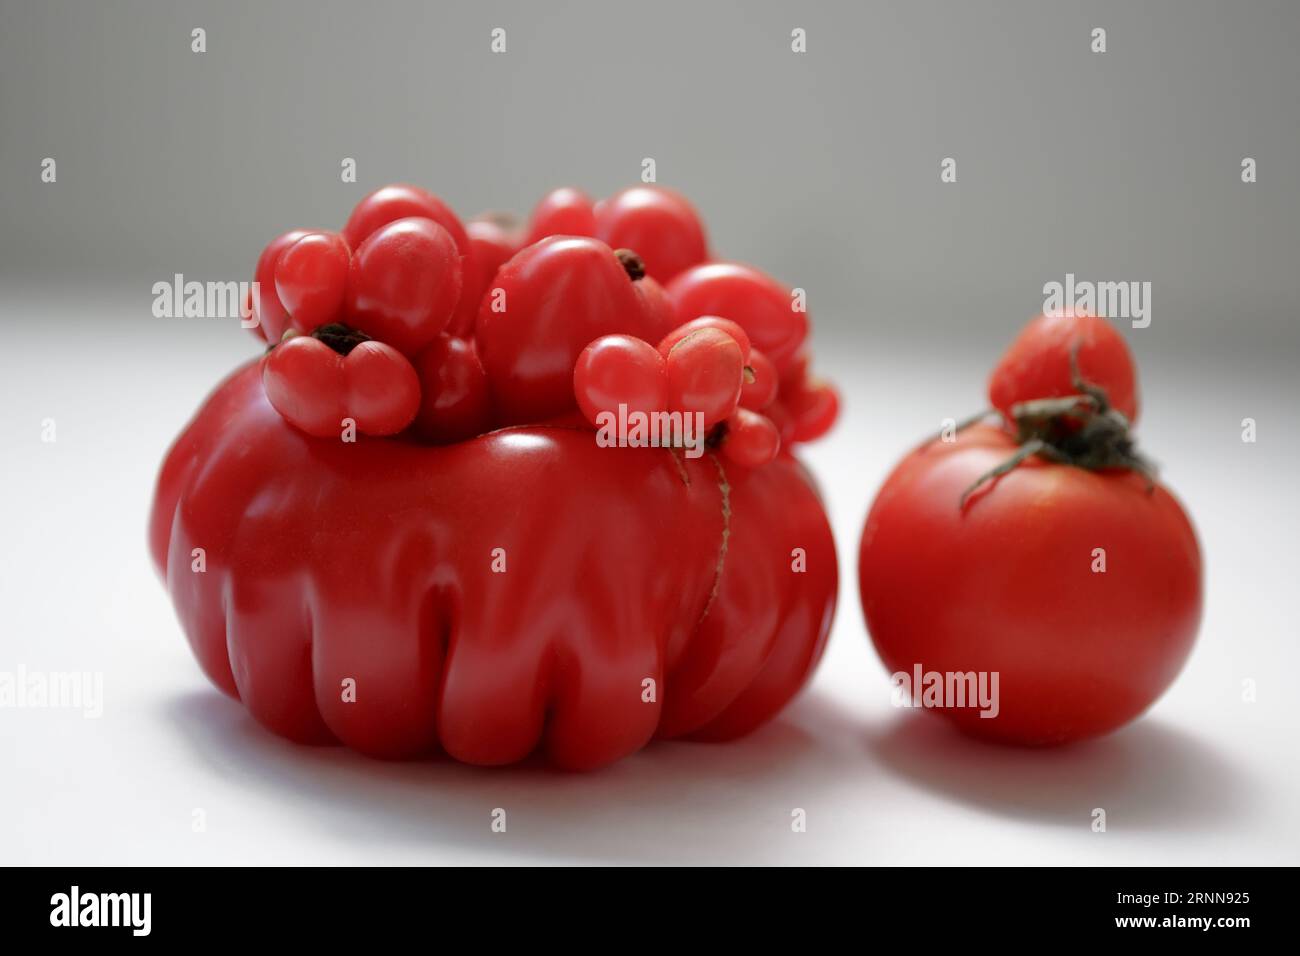 Mutant deformation of tomatoes, outgrowth on a fetus. Severely malformed tomato. A non-standard ugly vegetable. Deformed abnormal red tomato on a whit Stock Photo